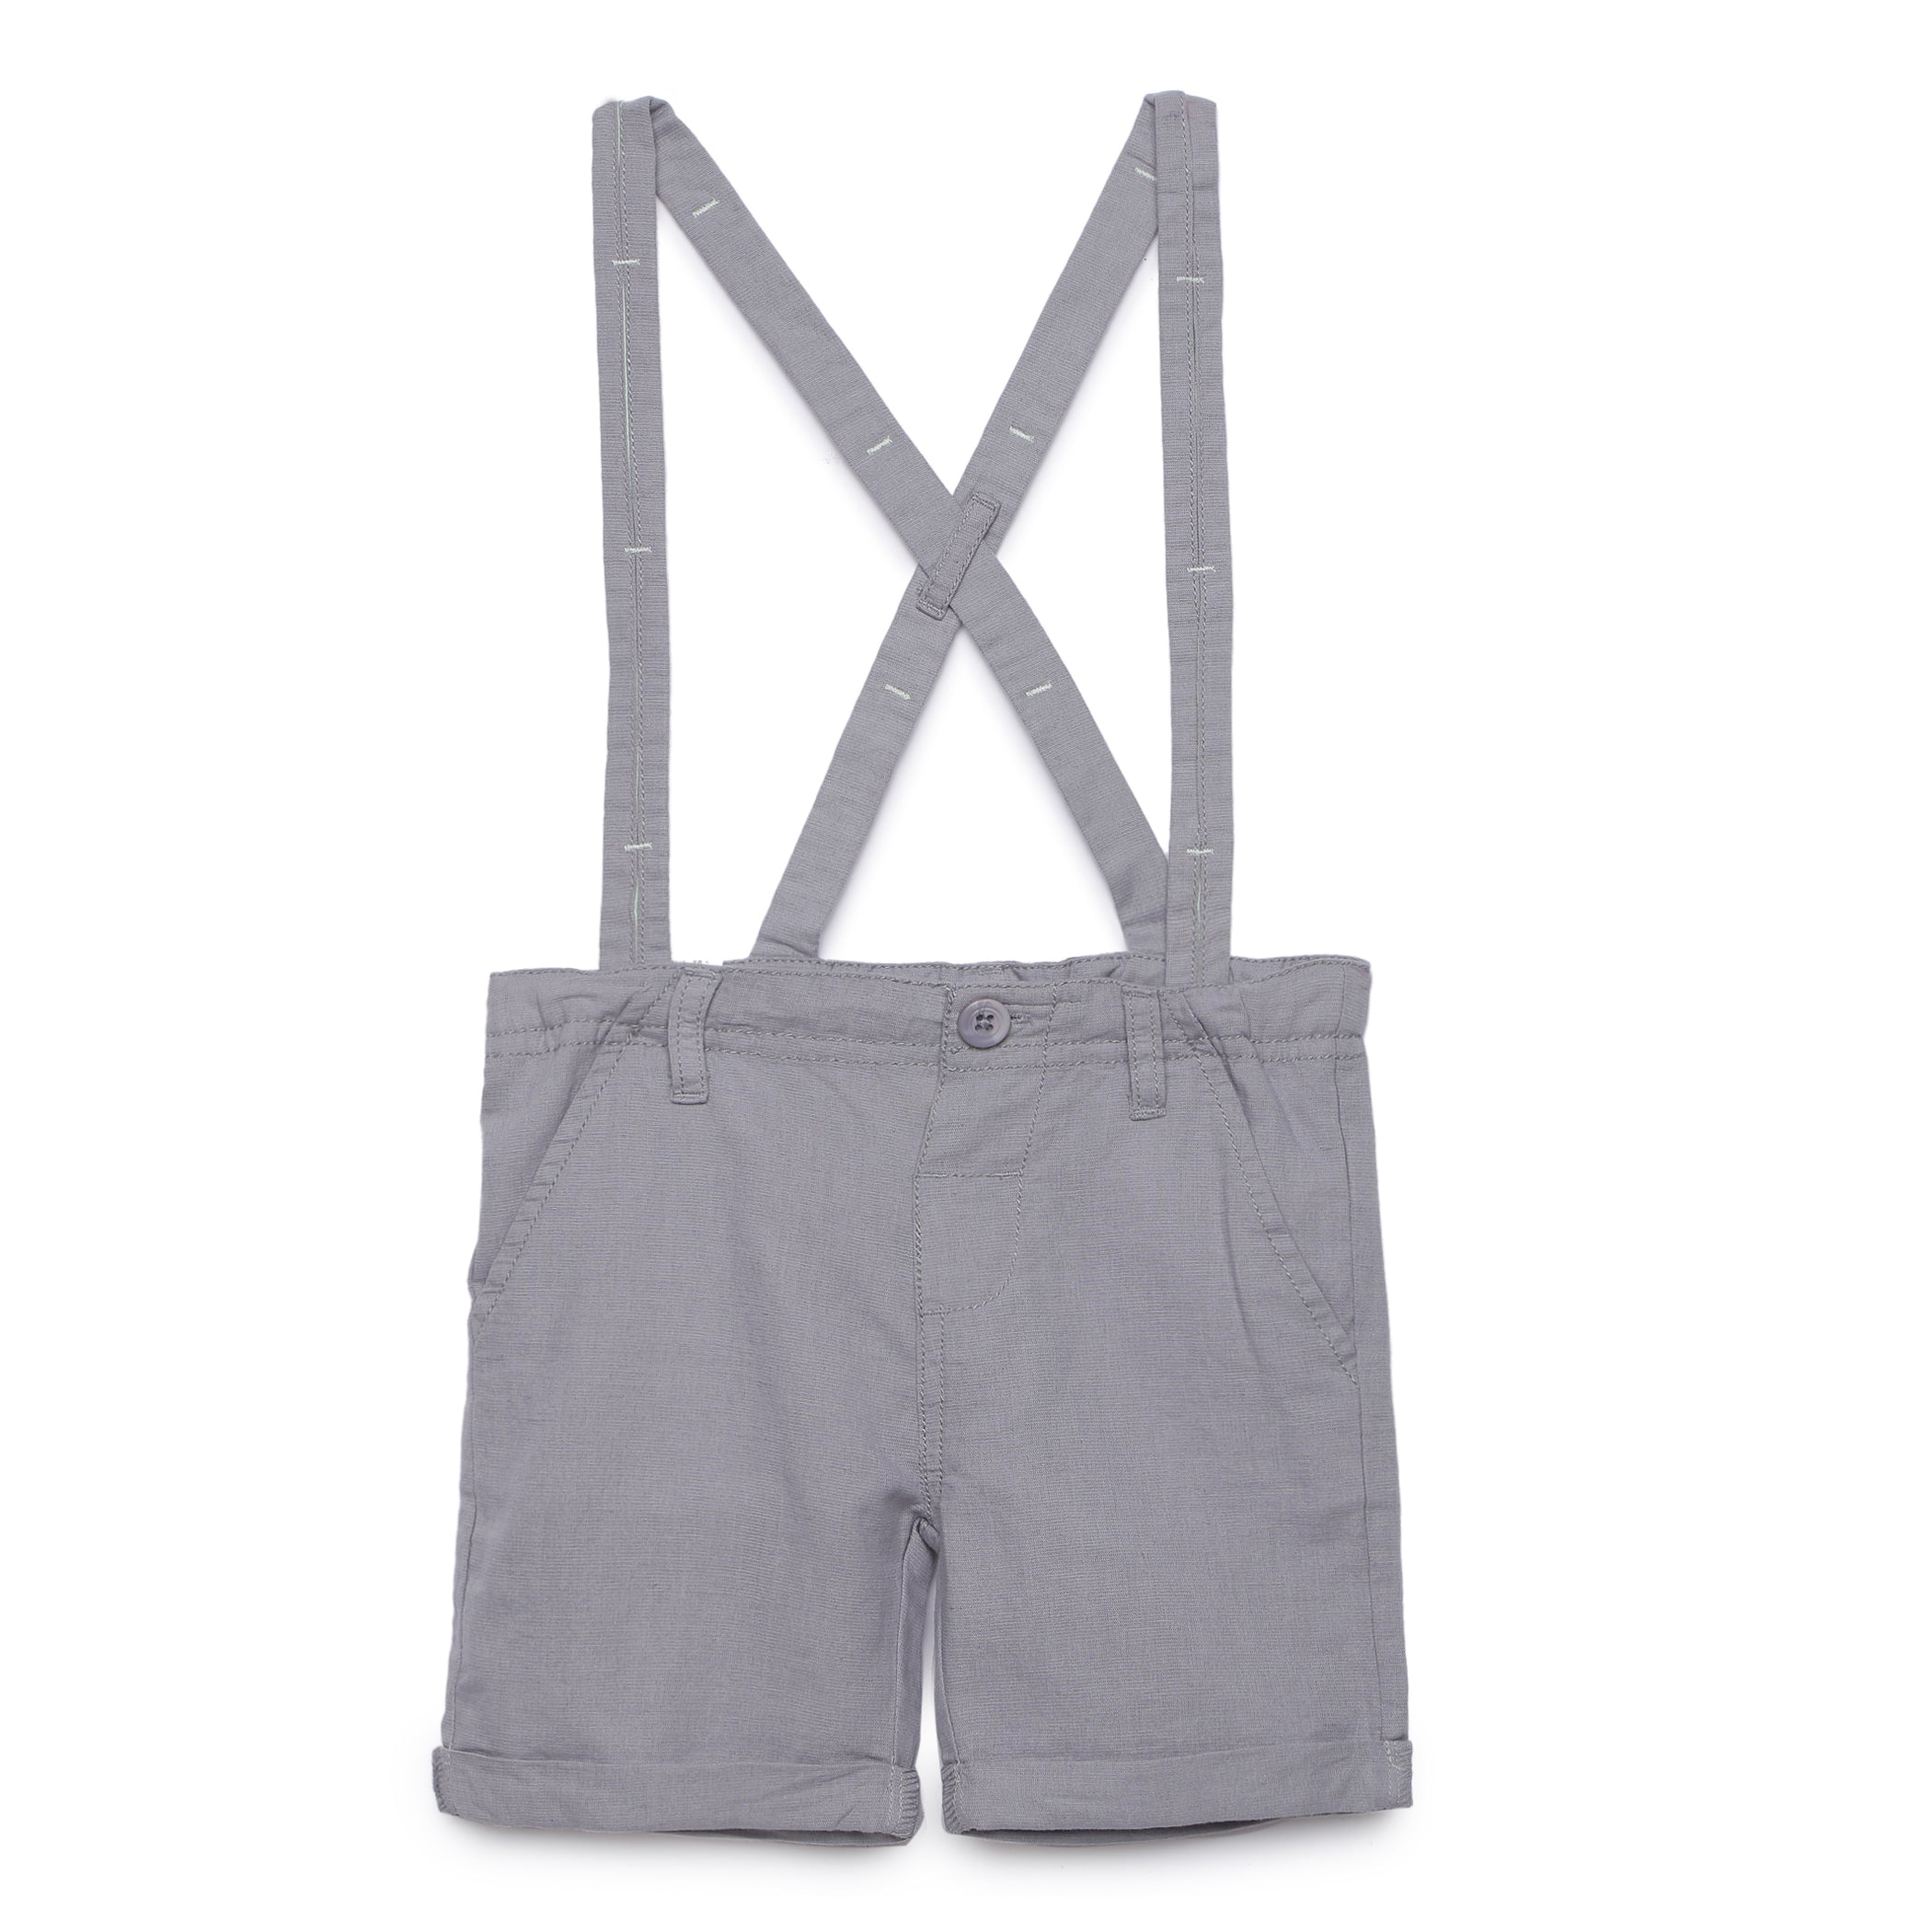 Baby Boys Shirt With Suspender Shorts